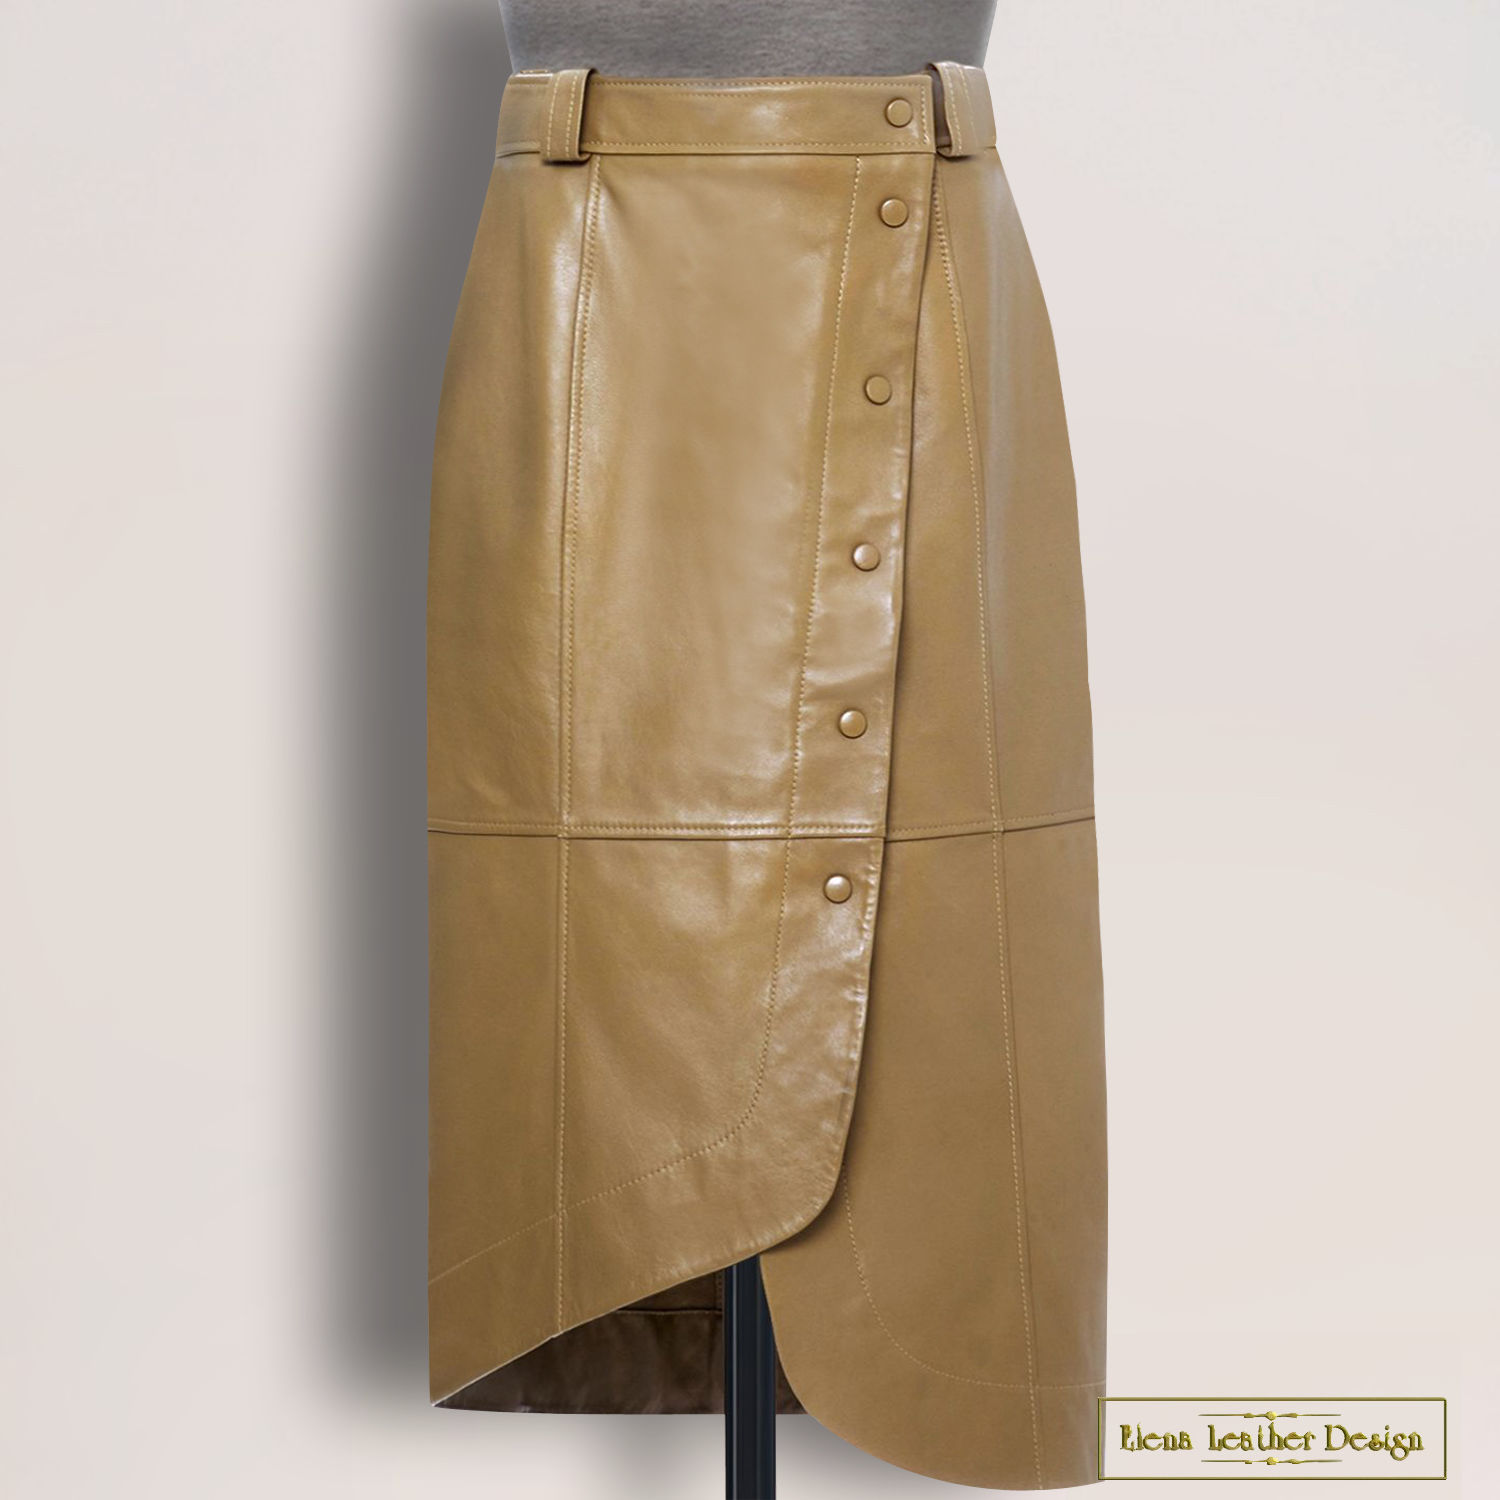 Straight 'Straw' skirt made of genuine leather/suede (any color), Skirts, Podolsk,  Фото №1